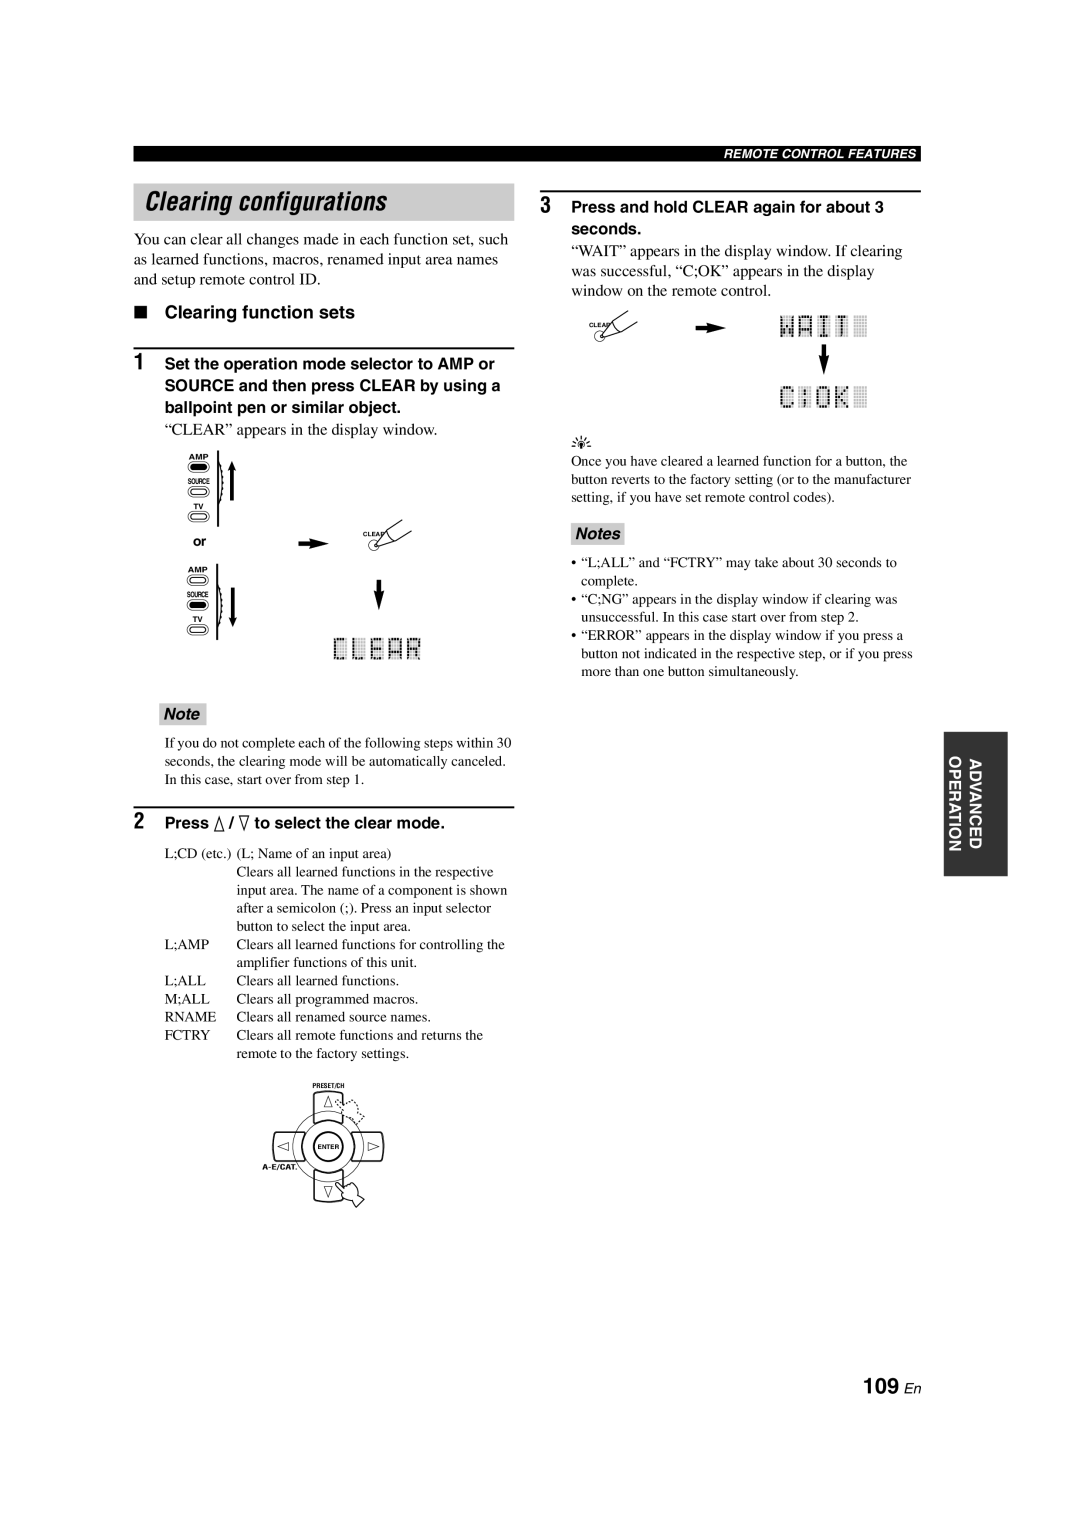 Yamaha HTR-6090 owner manual Clearing configurations, 109 En, Clearing function sets, Notes 